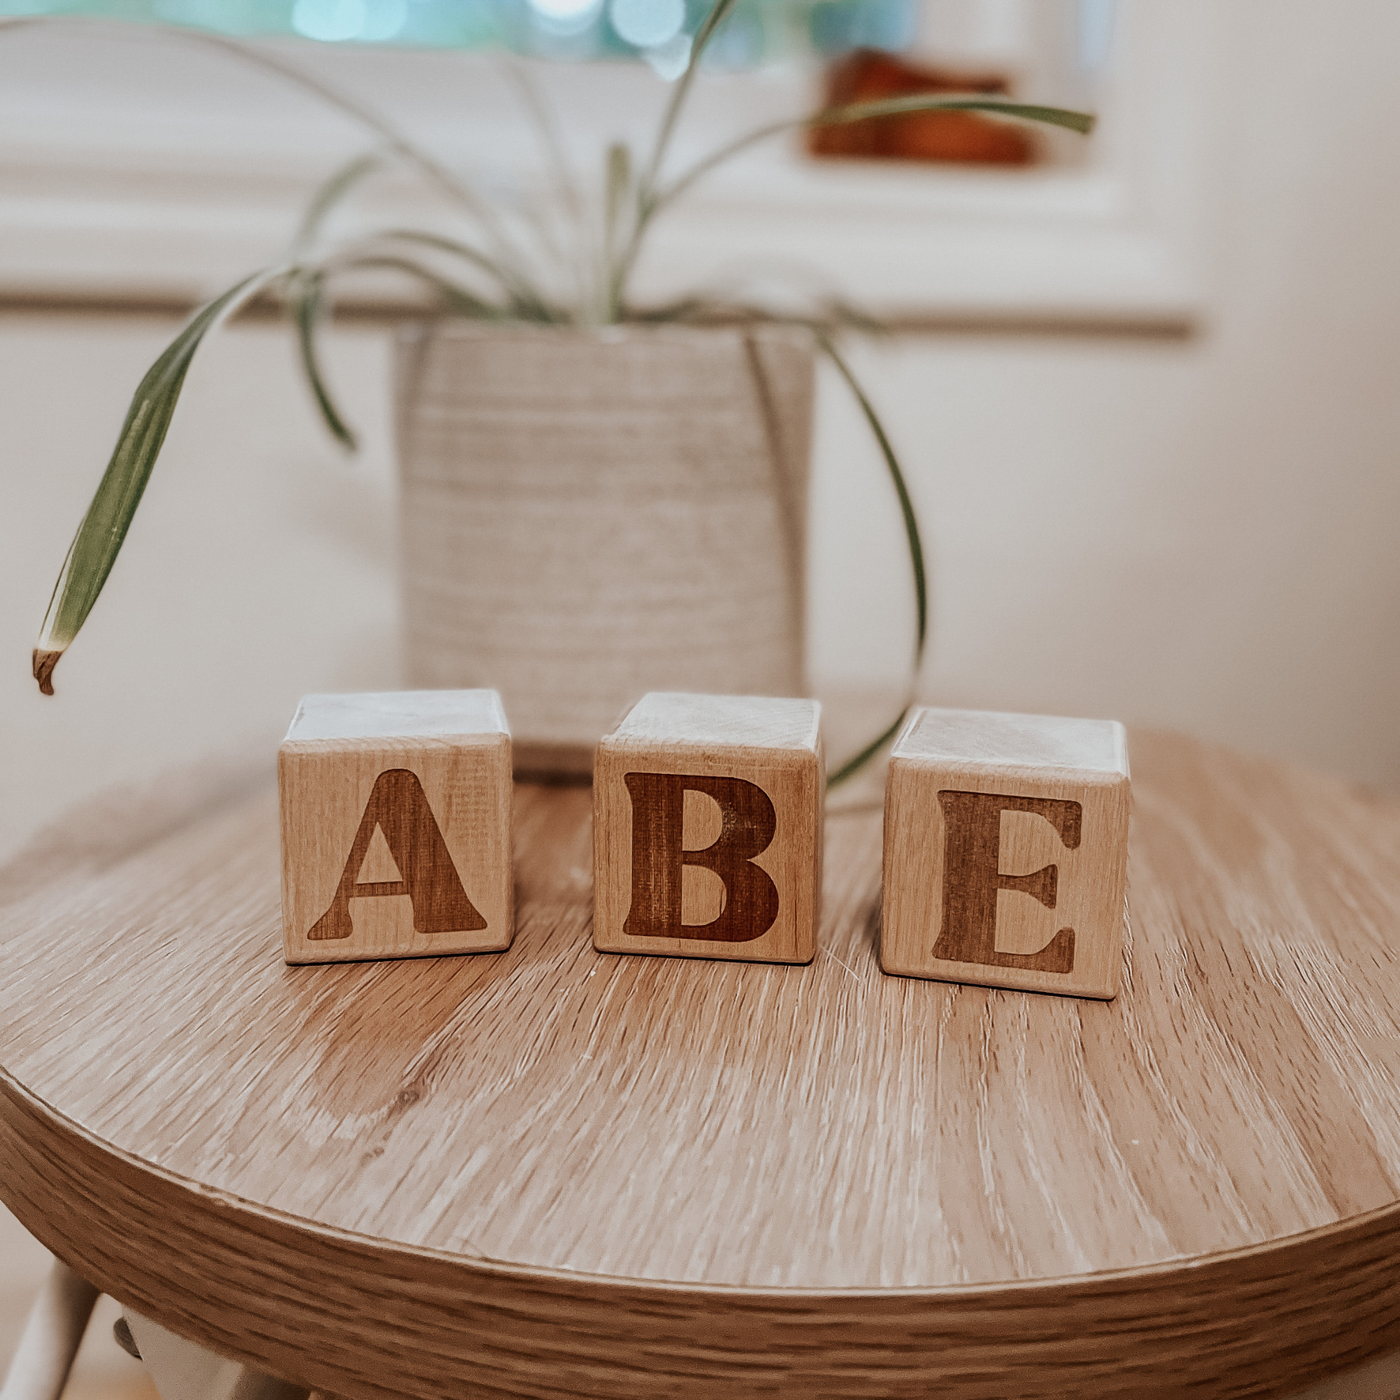 Personalized baby name blocks